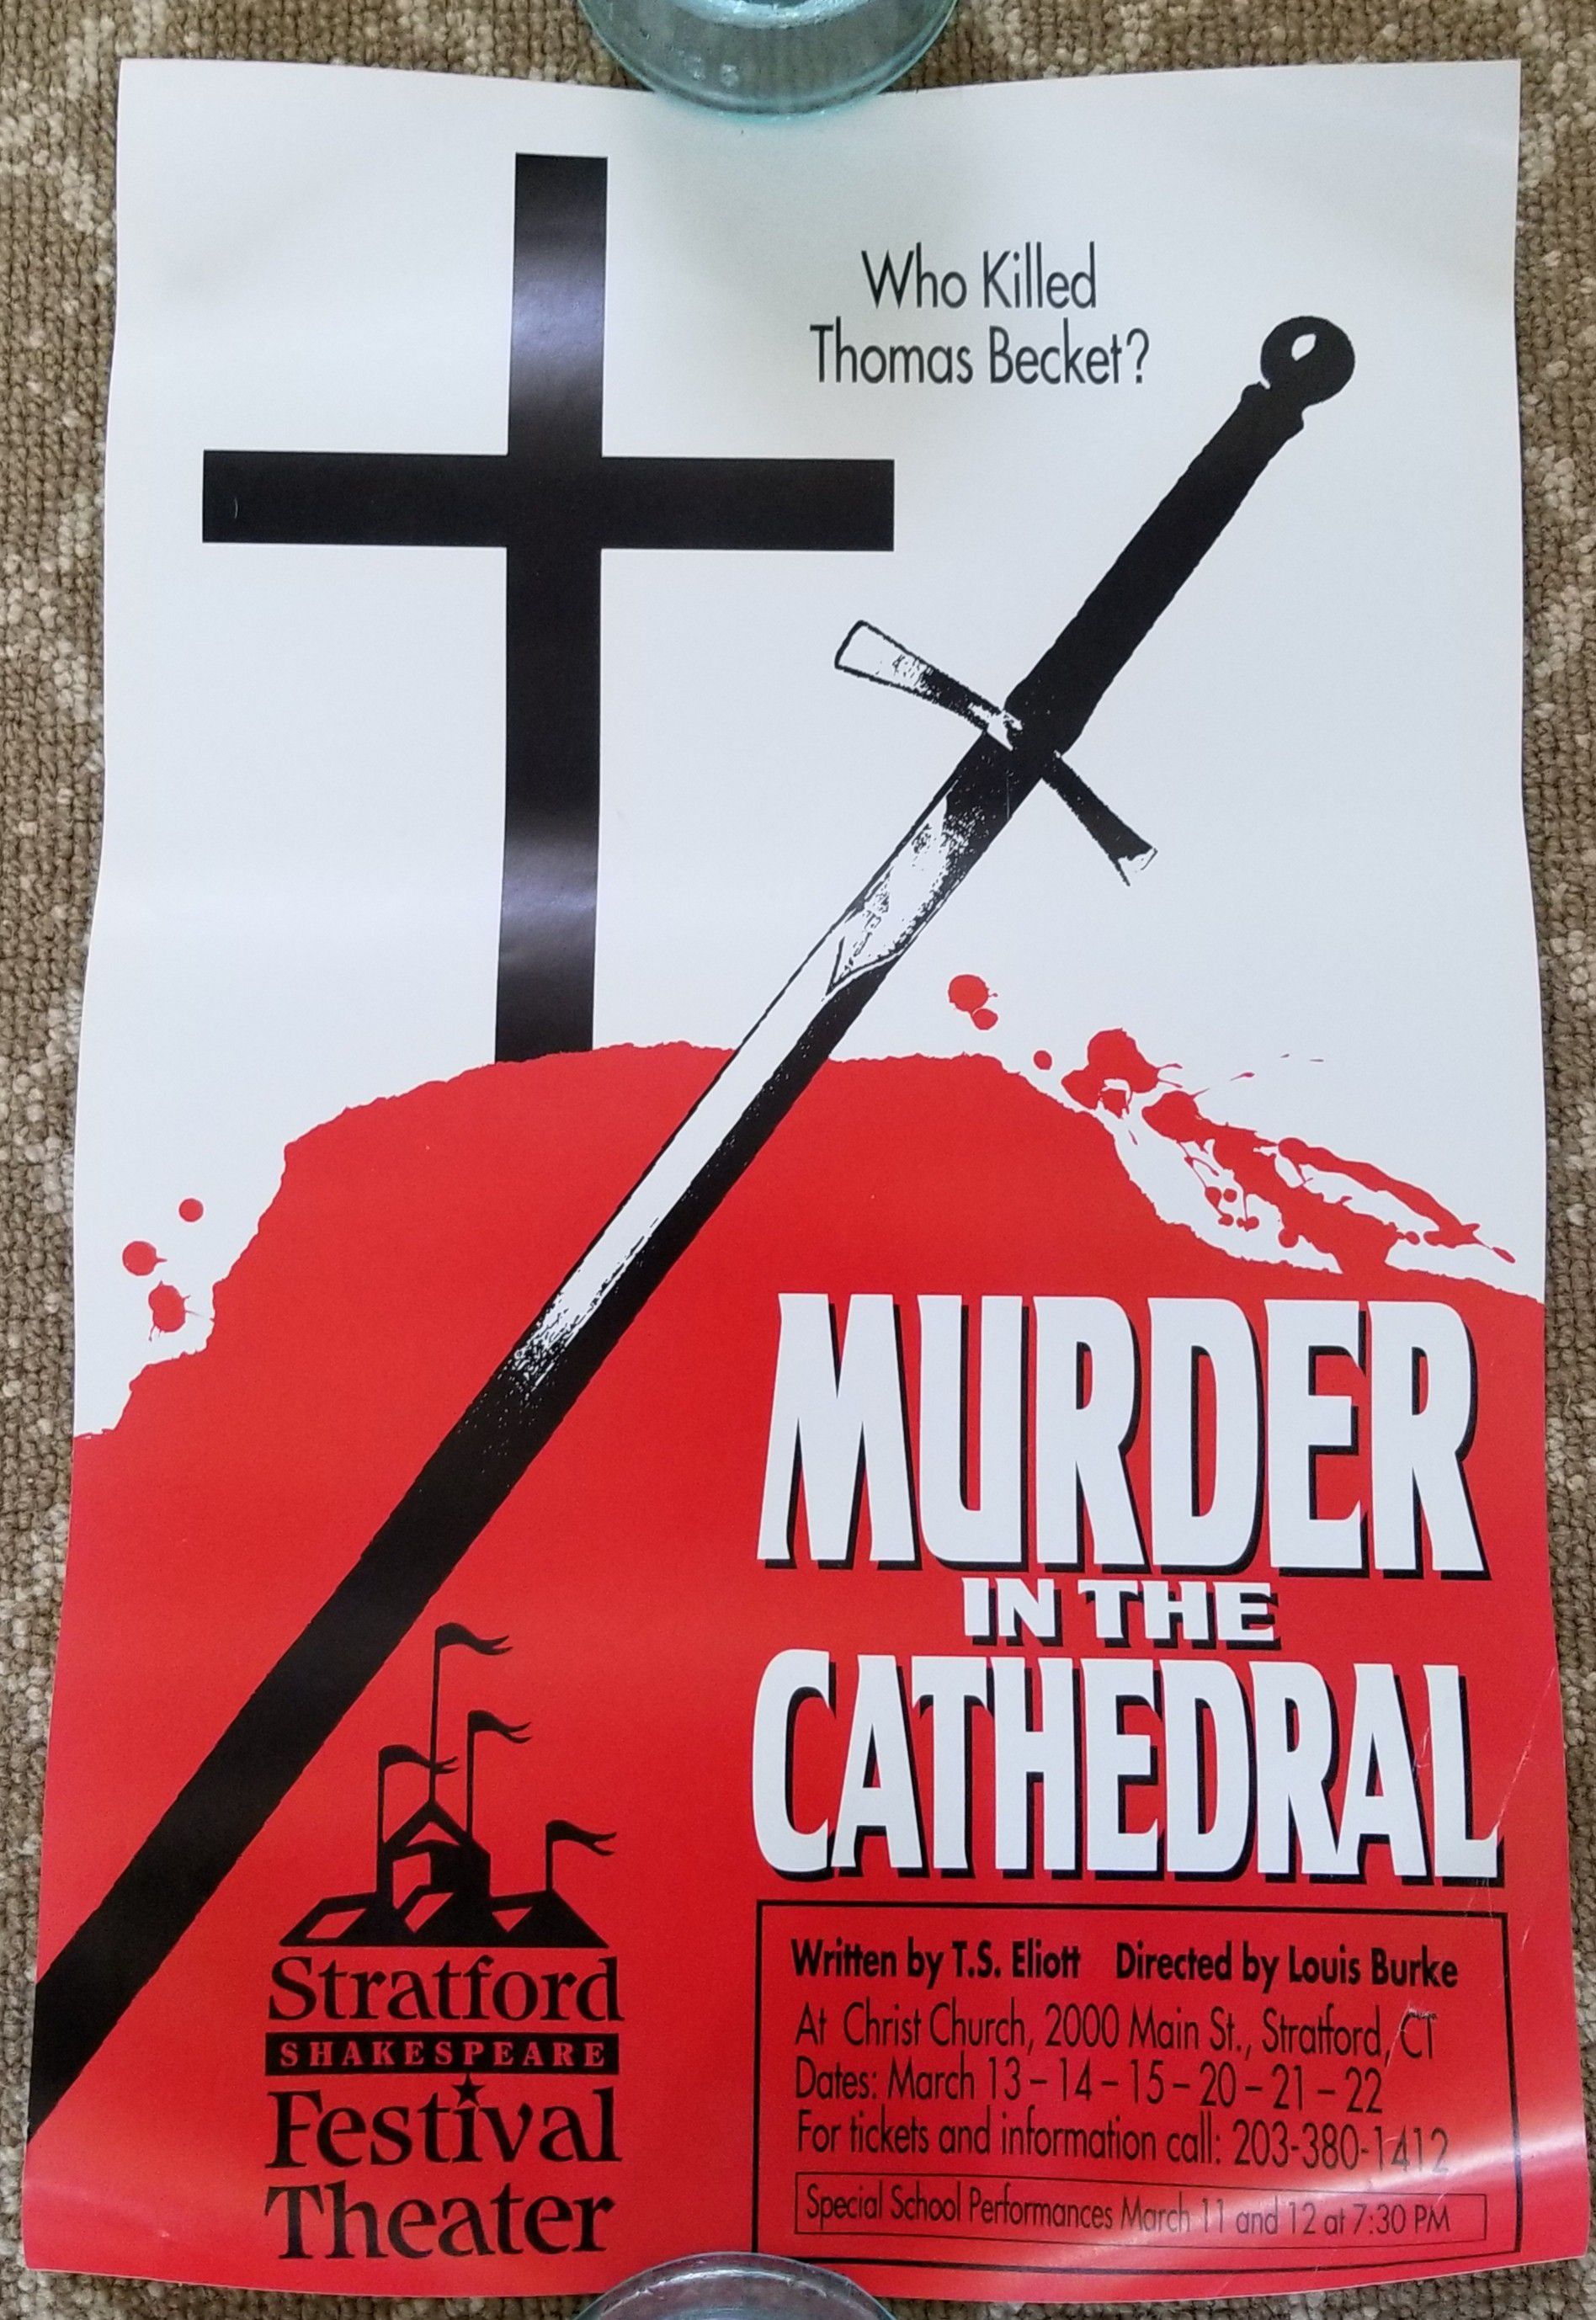 Shakespeare Festival Theater Poster – Murder In the Cathedral